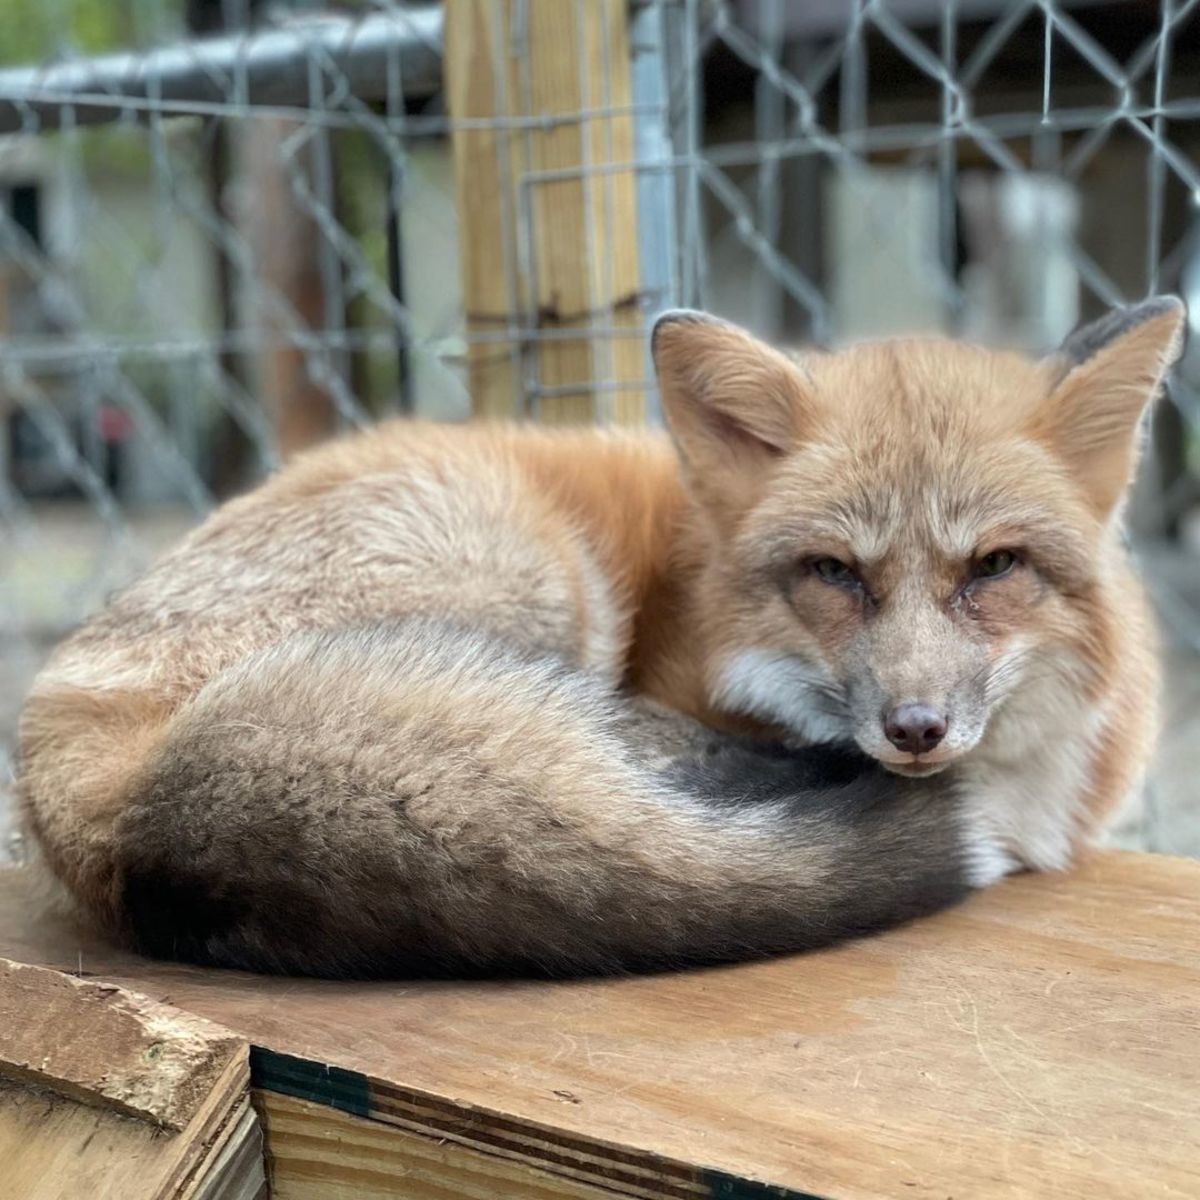 Penny. join list: RescueCritters (53 subs)Mention History Penny the fox at Pawsitive Beginnings.